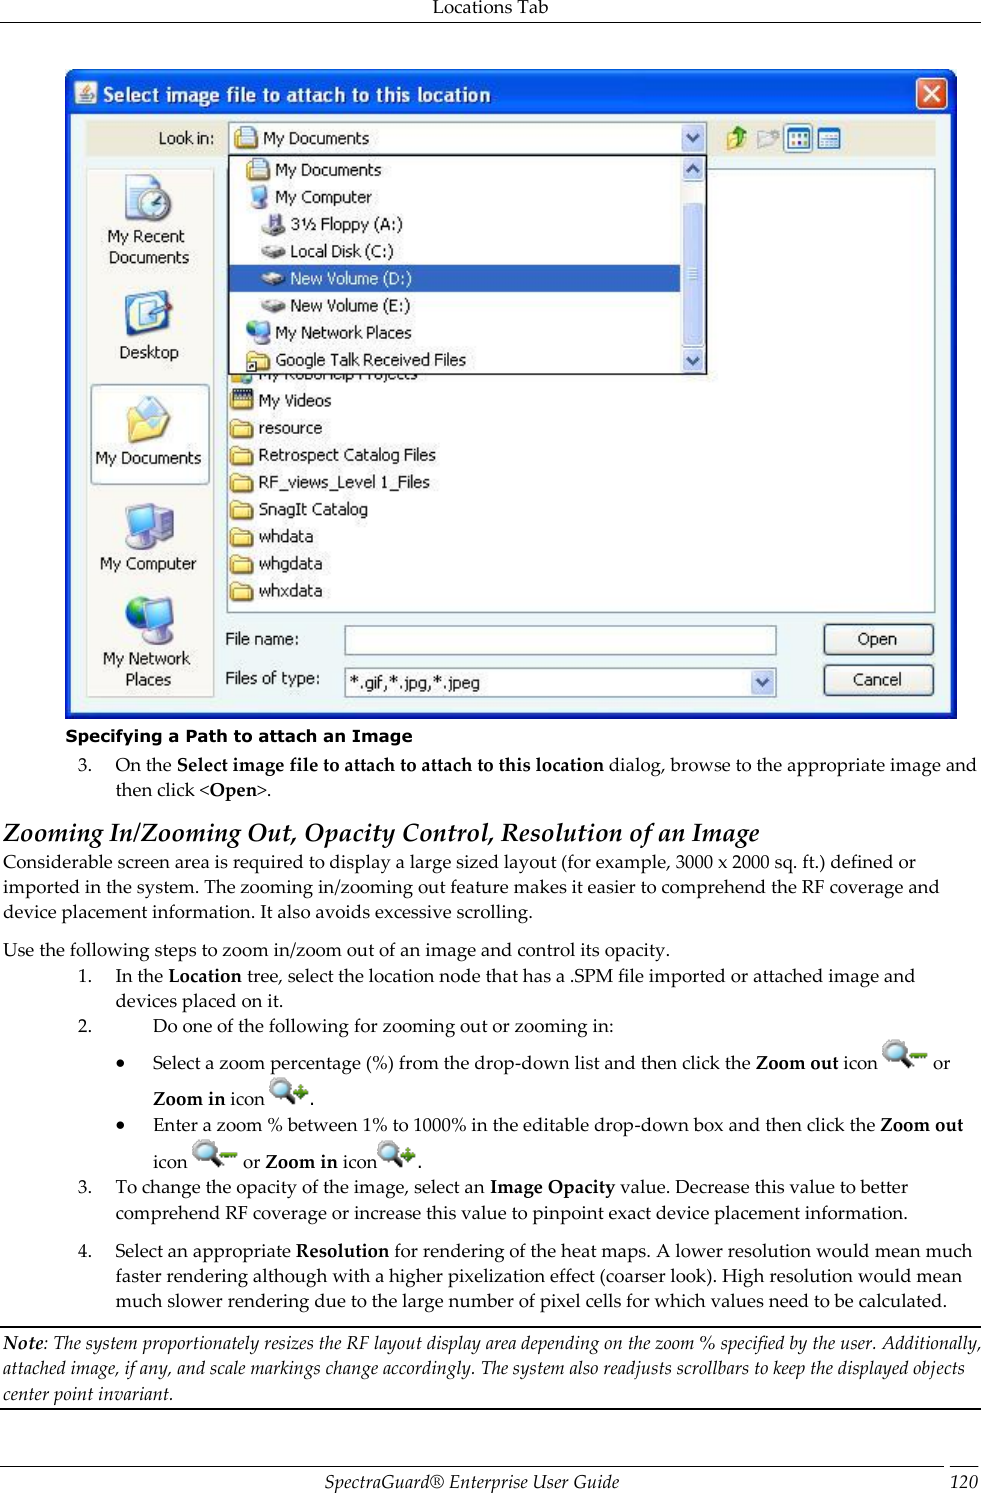 Locations Tab SpectraGuard®  Enterprise User Guide 120  Specifying a Path to attach an Image 3. On the Select image file to attach to attach to this location dialog, browse to the appropriate image and then click &lt;Open&gt;. Zooming In/Zooming Out, Opacity Control, Resolution of an Image Considerable screen area is required to display a large sized layout (for example, 3000 x 2000 sq. ft.) defined or imported in the system. The zooming in/zooming out feature makes it easier to comprehend the RF coverage and device placement information. It also avoids excessive scrolling. Use the following steps to zoom in/zoom out of an image and control its opacity. 1. In the Location tree, select the location node that has a .SPM file imported or attached image and devices placed on it. 2. Do one of the following for zooming out or zooming in:  Select a zoom percentage (%) from the drop-down list and then click the Zoom out icon   or Zoom in icon  .  Enter a zoom % between 1% to 1000% in the editable drop-down box and then click the Zoom out icon   or Zoom in icon . 3. To change the opacity of the image, select an Image Opacity value. Decrease this value to better comprehend RF coverage or increase this value to pinpoint exact device placement information. 4. Select an appropriate Resolution for rendering of the heat maps. A lower resolution would mean much faster rendering although with a higher pixelization effect (coarser look). High resolution would mean much slower rendering due to the large number of pixel cells for which values need to be calculated. Note: The system proportionately resizes the RF layout display area depending on the zoom % specified by the user. Additionally, attached image, if any, and scale markings change accordingly. The system also readjusts scrollbars to keep the displayed objects center point invariant. 